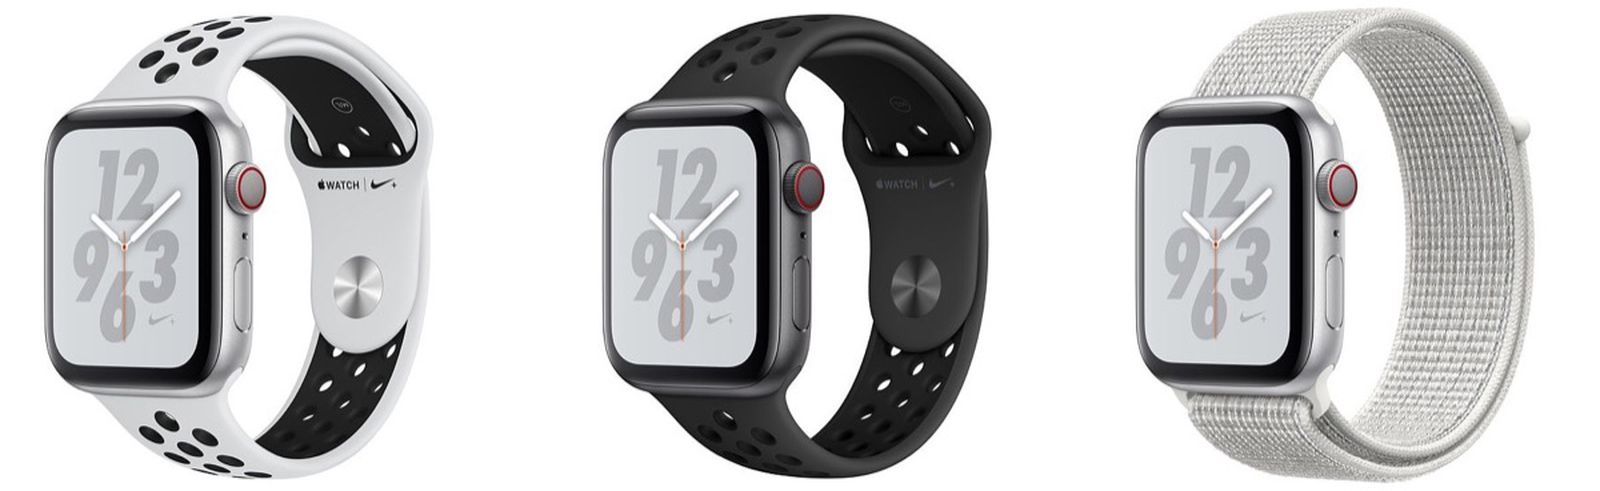 Apple Watch Nike+ 4 Launches With Available in Store MacRumors